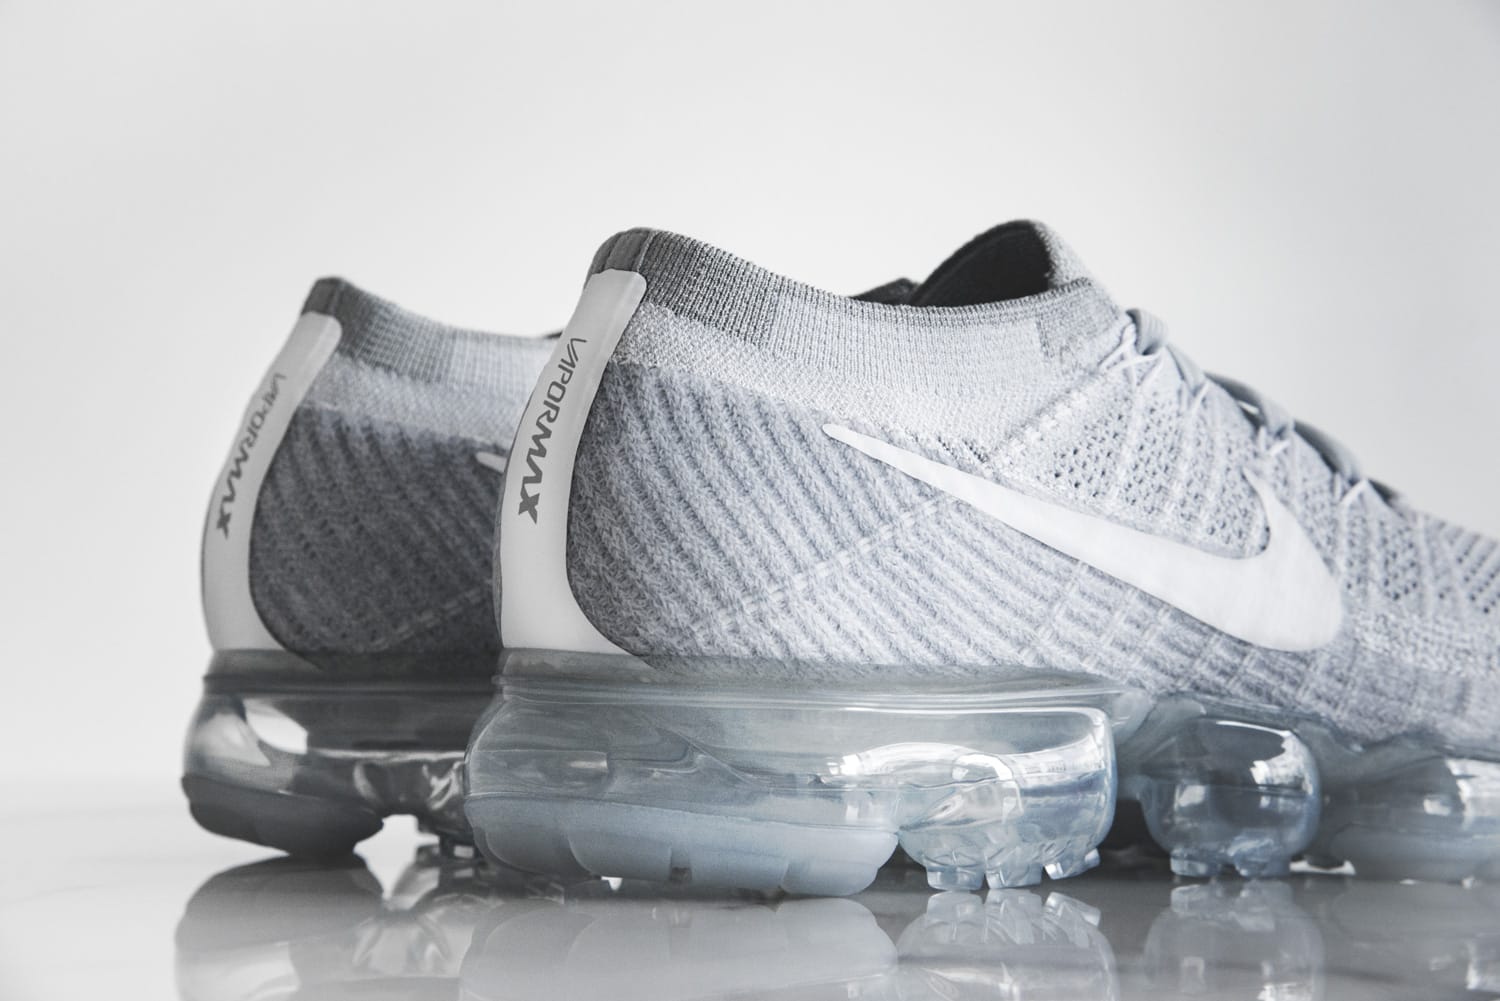 nike air vapormax commercial